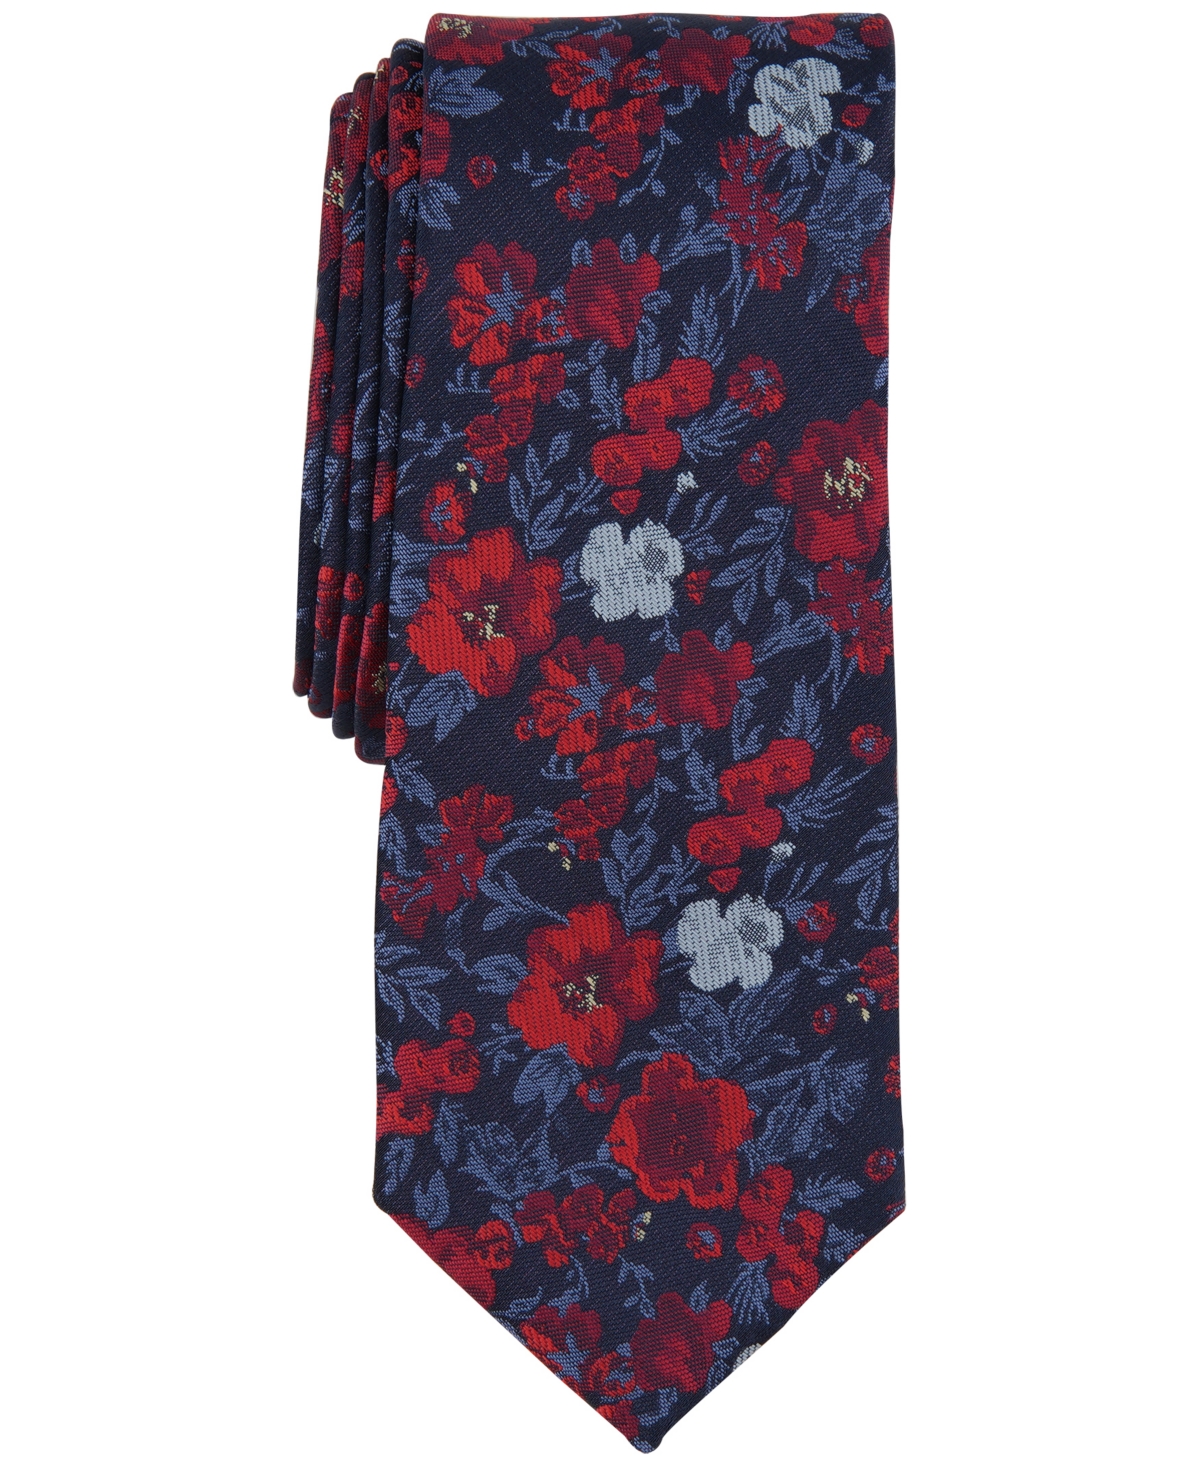 Men's Lisbon Floral-Print Tie, Created for Macy's L - Red